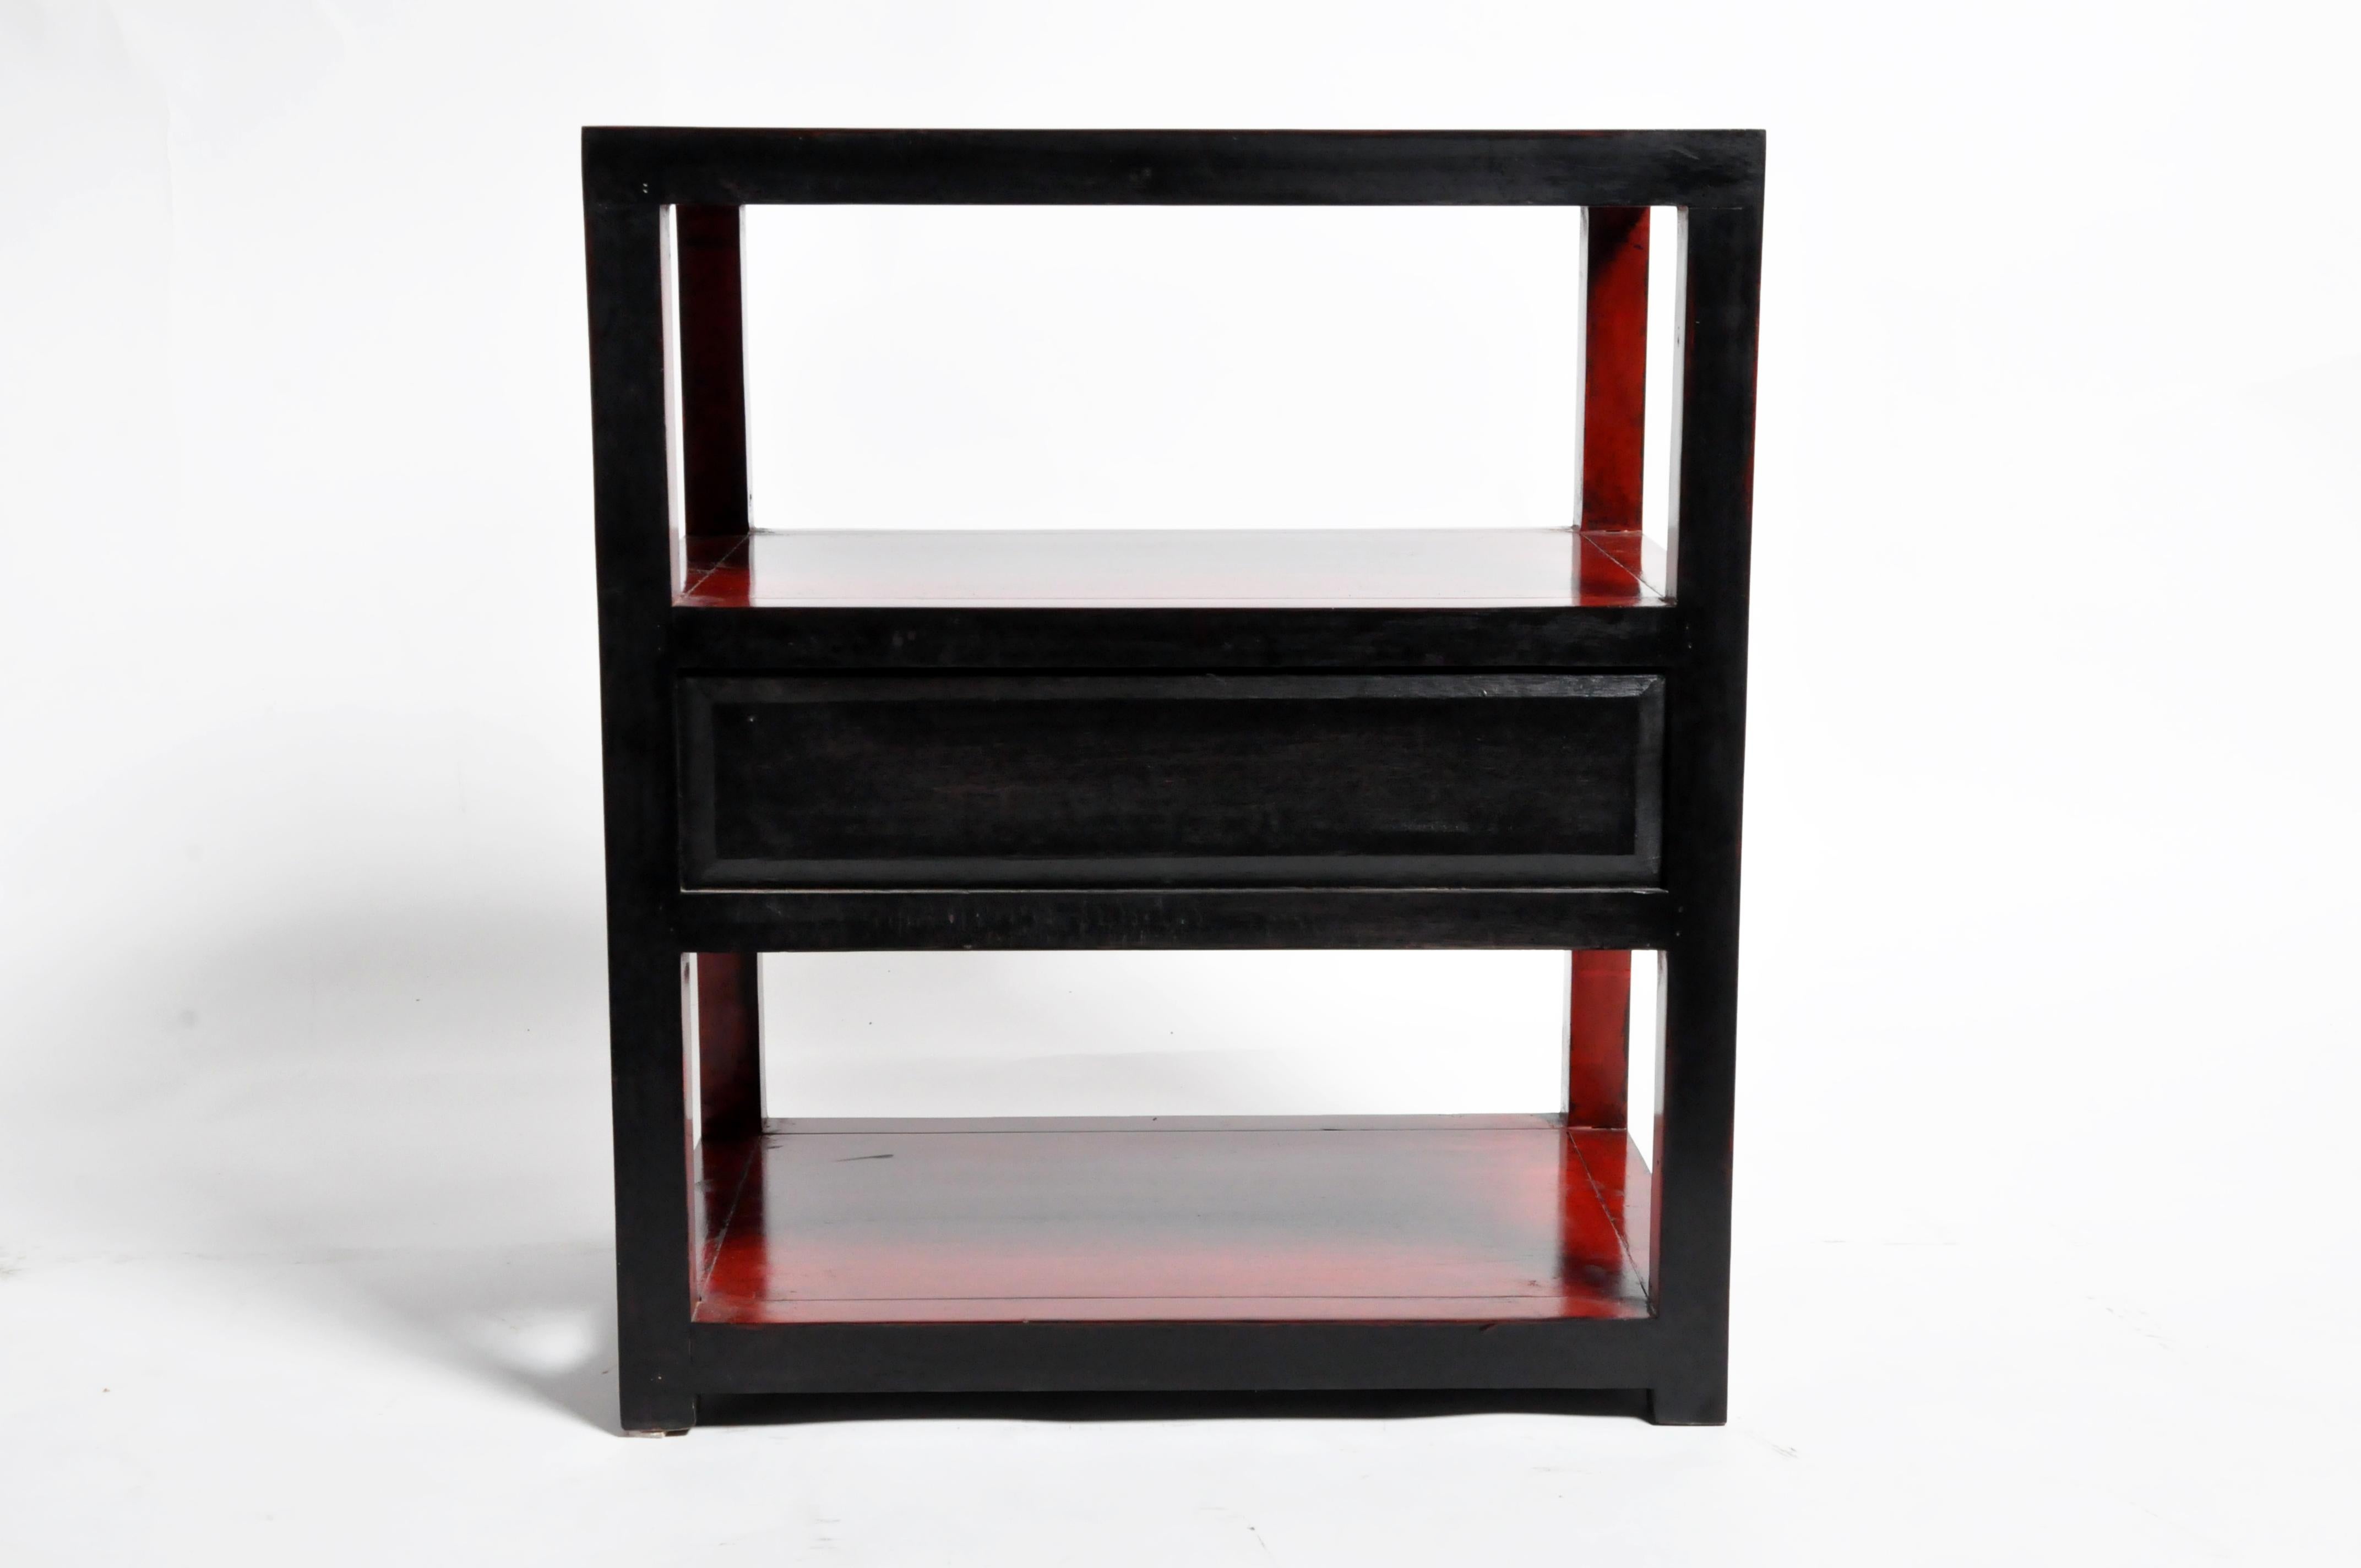 These handsome pair of side tables are from China and were made from elmwood. They both feature a red lacquered finish with display shelves and a drawer for storage. You can also customize a brand new one and make it your own. Wood, color, finish,